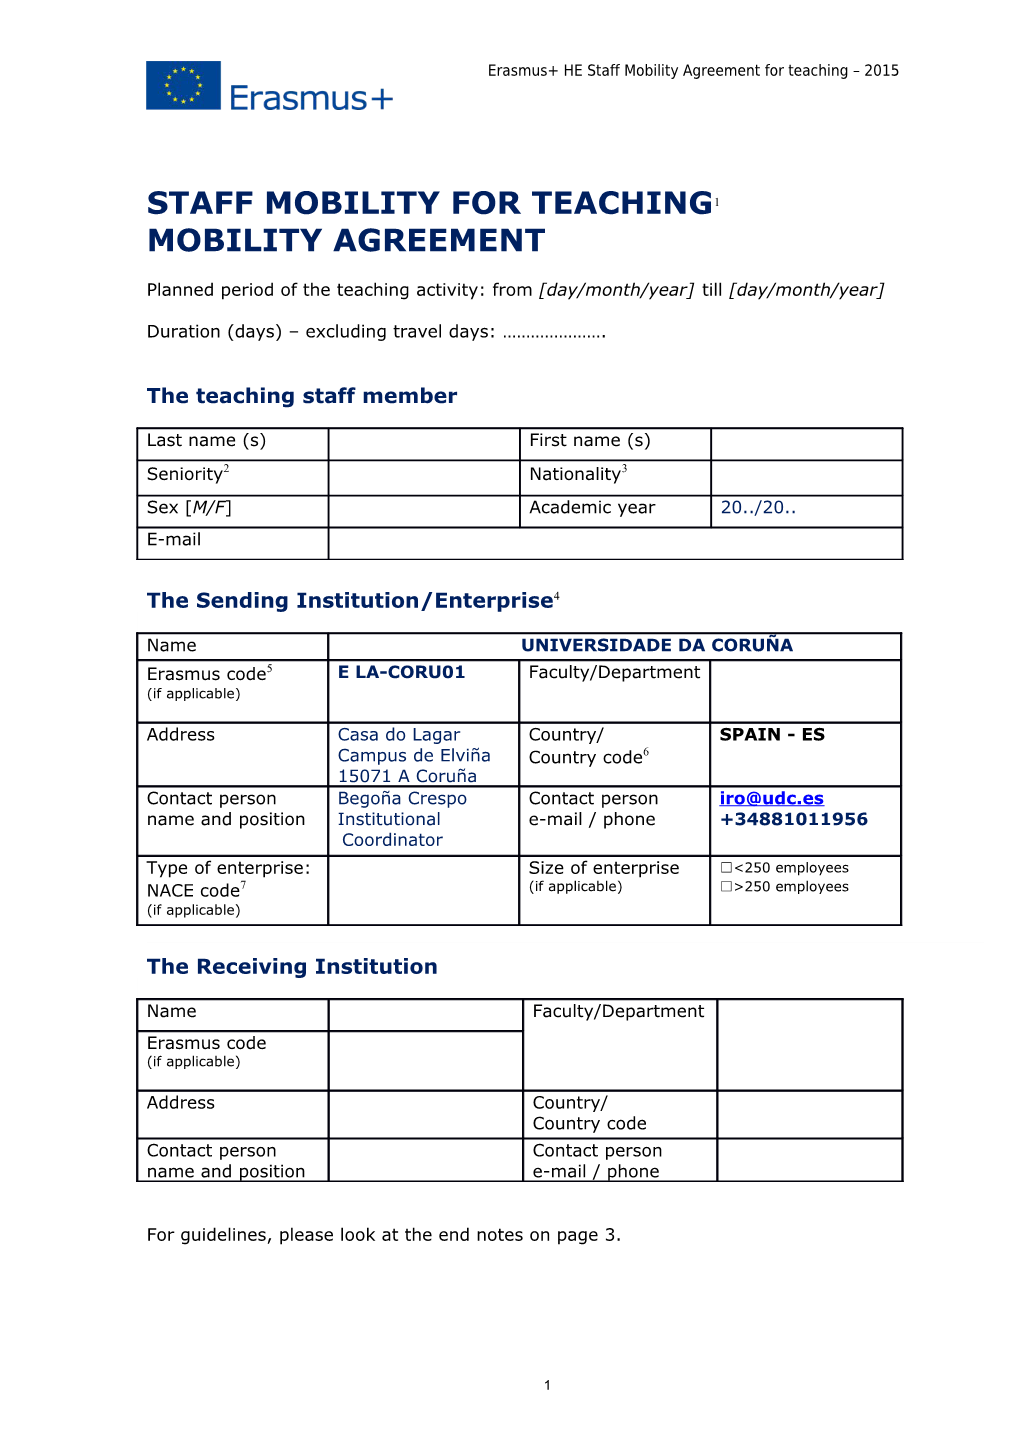 Erasmus+ HE Staff Mobility Agreement for Teaching 2015 s1